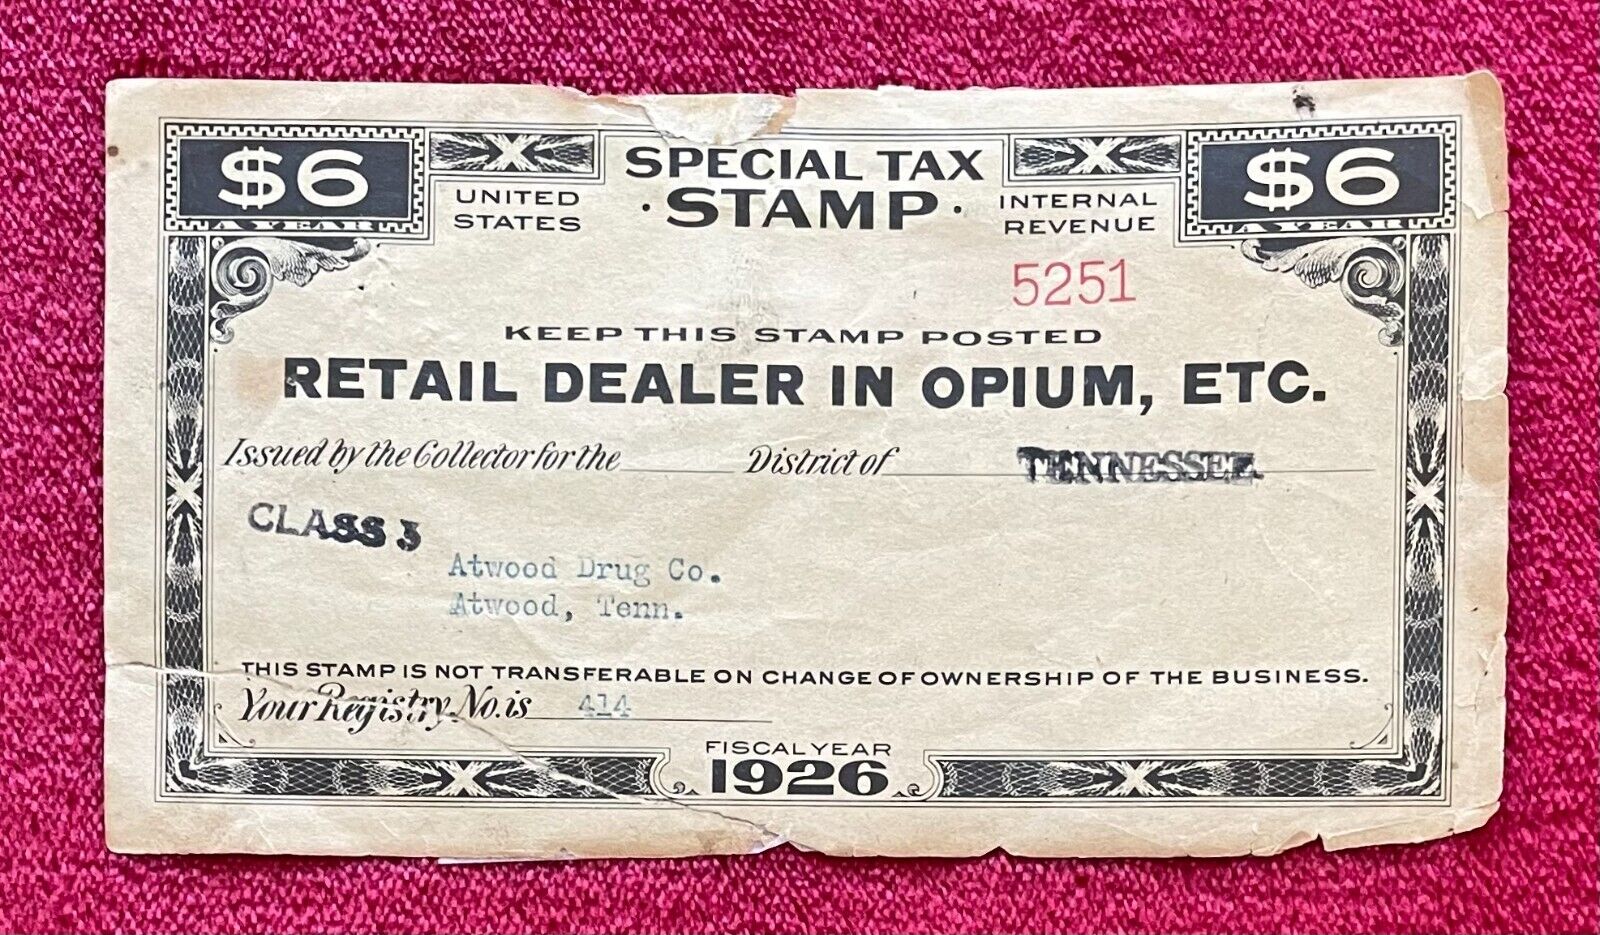 1926 INTERNAL REVENUE TAX STAMP for DEALER IN OPIUM - ATWOOD DRUG CO. TENNESSEE